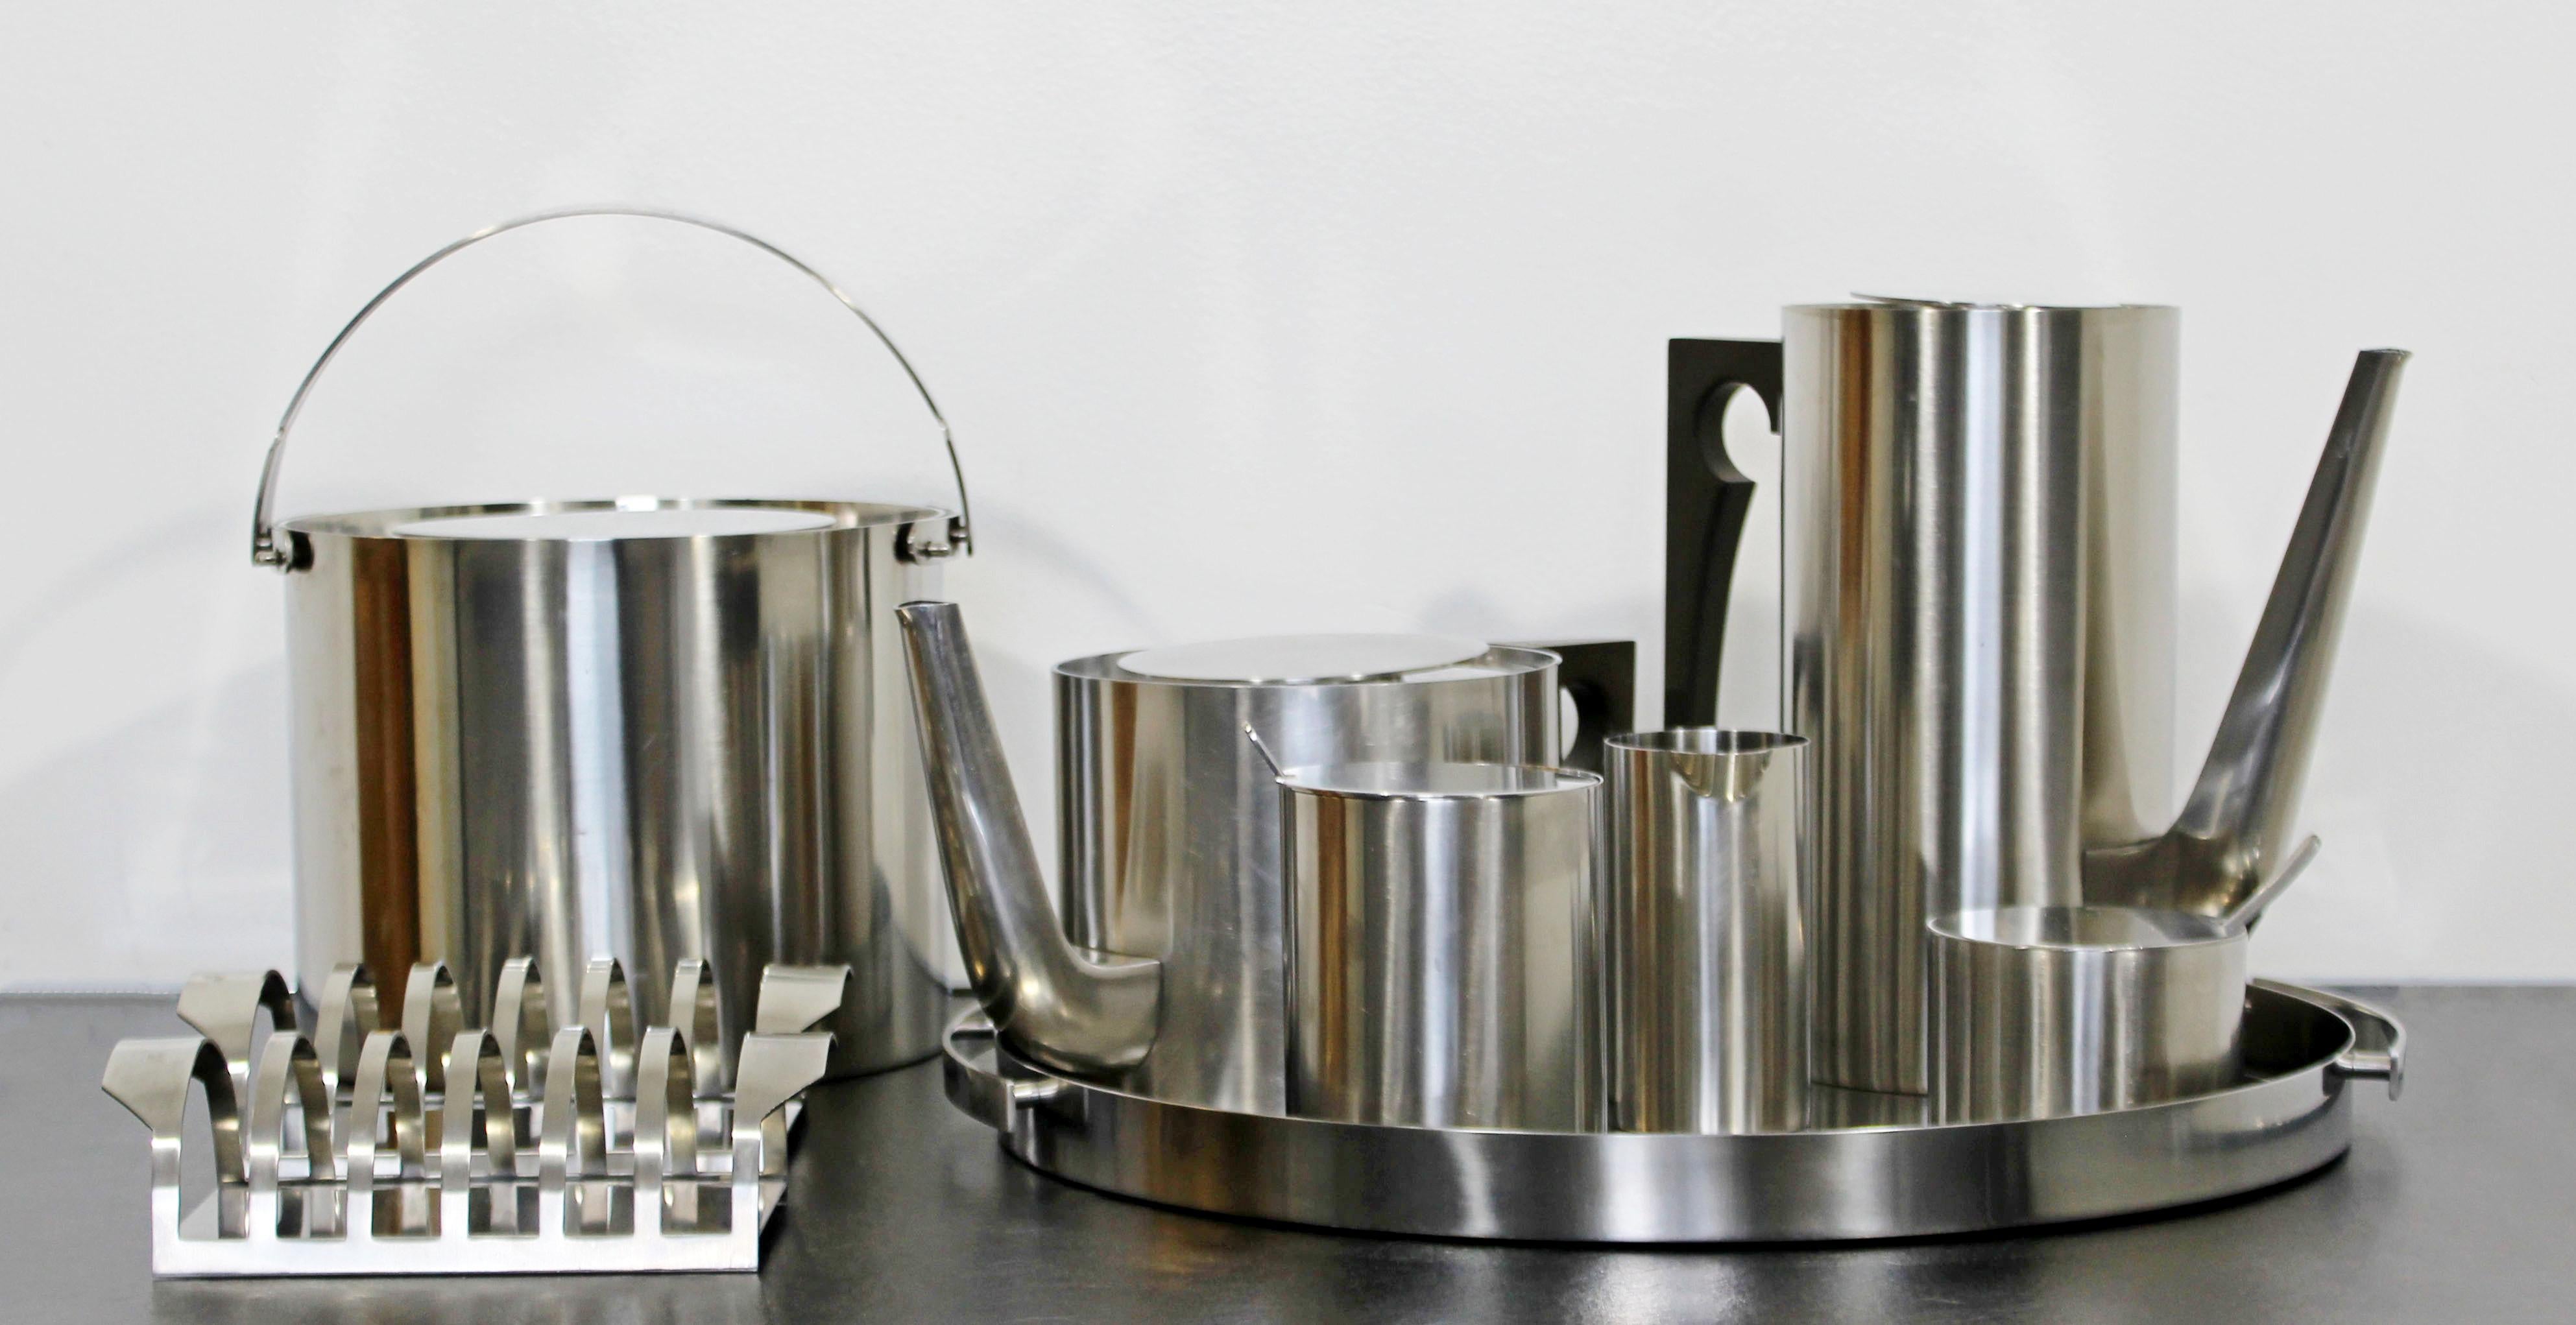 For your consideration is a nine piece, stainless steel tea and coffee service set, made in Denmark, by Arne Jacobsen for Stelton's Cylinda Line, circa 1970s. Set includes an ice bucket, a tea kettle, a tall caraf, a serving tray, a sugar caster